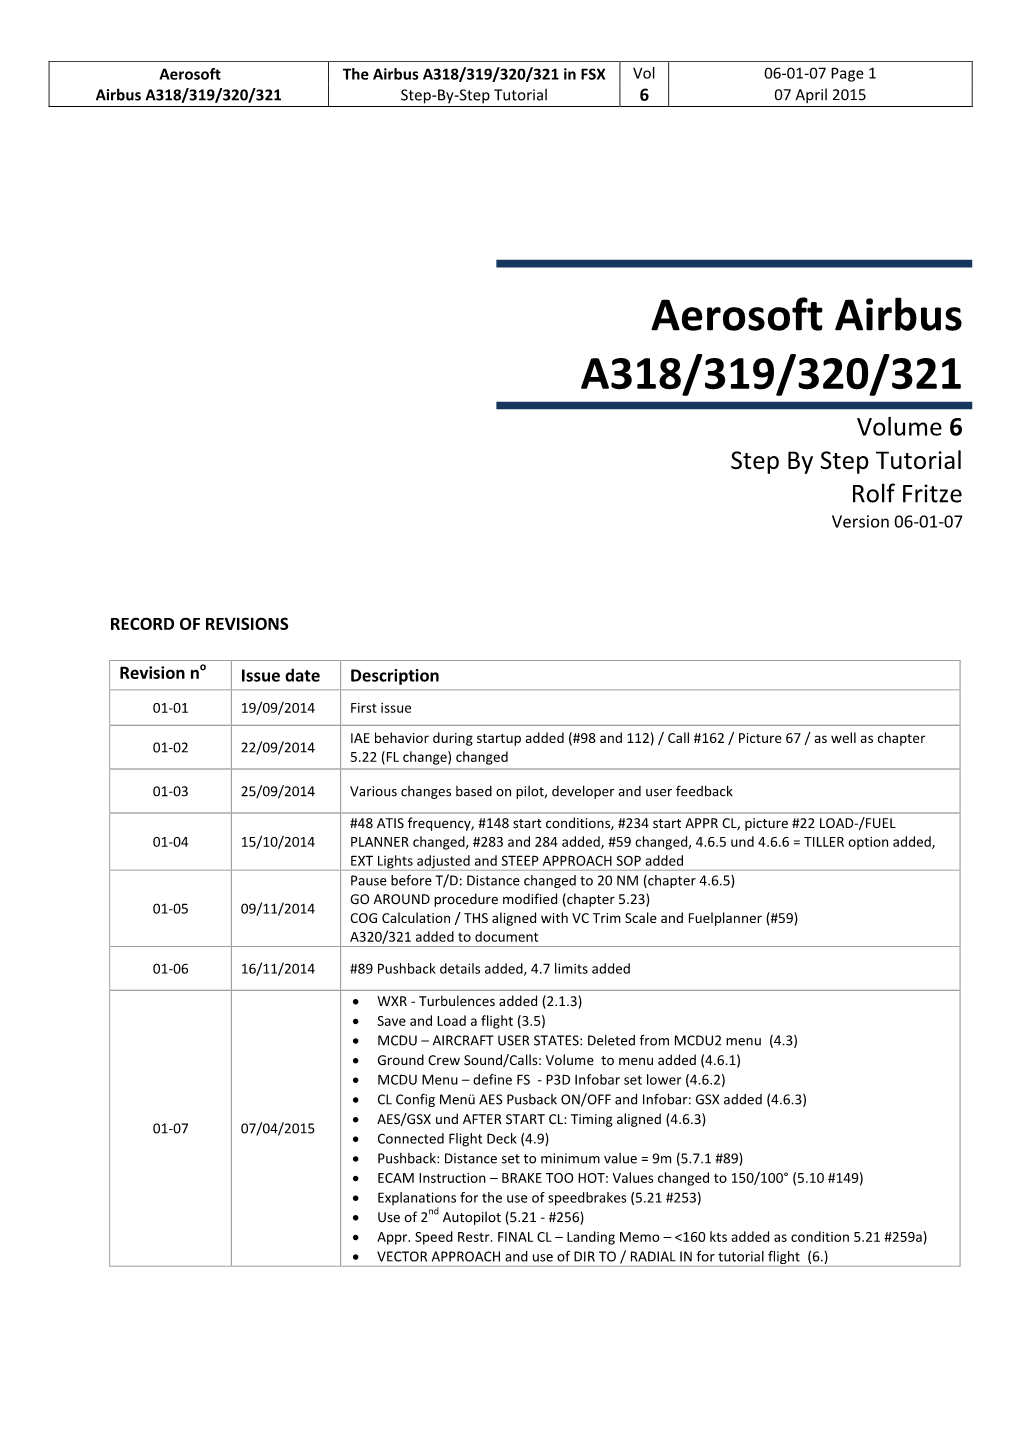 Aerosoft Airbus A318/319/320/321 Volume 6 Step by Step Tutorial Rolf Fritze Version 06-01-07